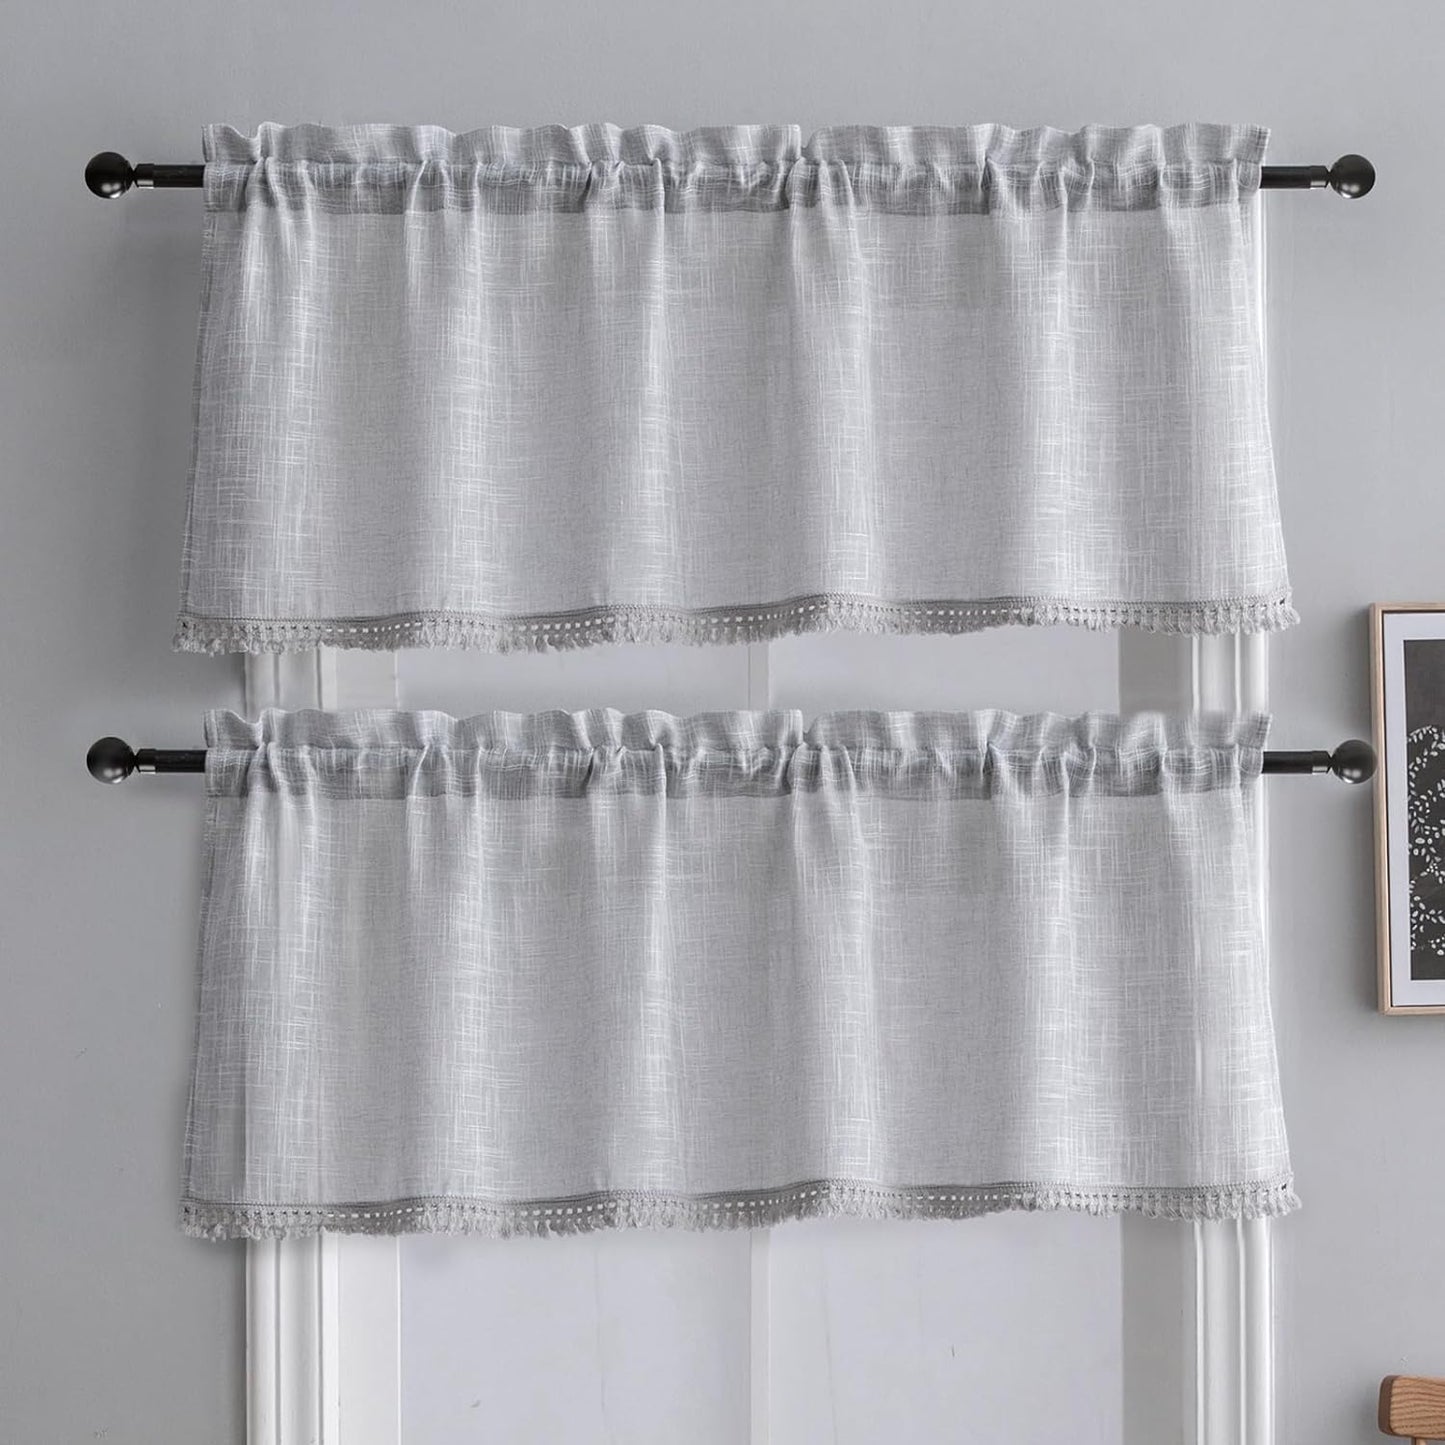 Beda Home Tassel Linen Textured Swag Curtain Valance for Farmhouses’ Kitchen; Light Filtering Rustic Short Swag Topper for Small Windows Bedroom Privacy Added Rod Pocket Design(Nature 36X63-2Pcs)  BD BEDA HOME Light Grey 52Wx18L - 2 Pcs 